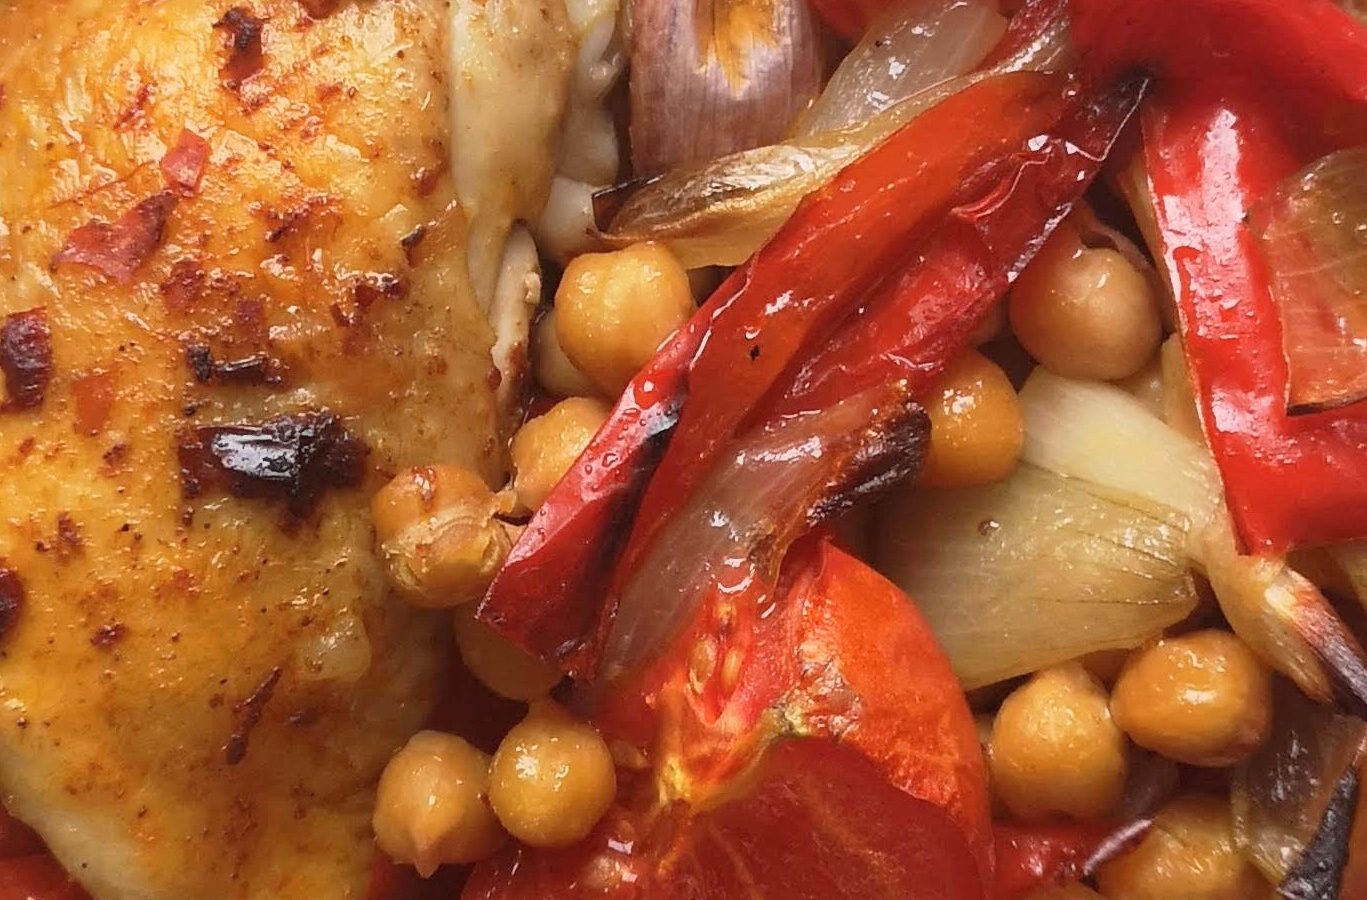 Harissa coated chicken with chickpeas, tomatoes and red pepper